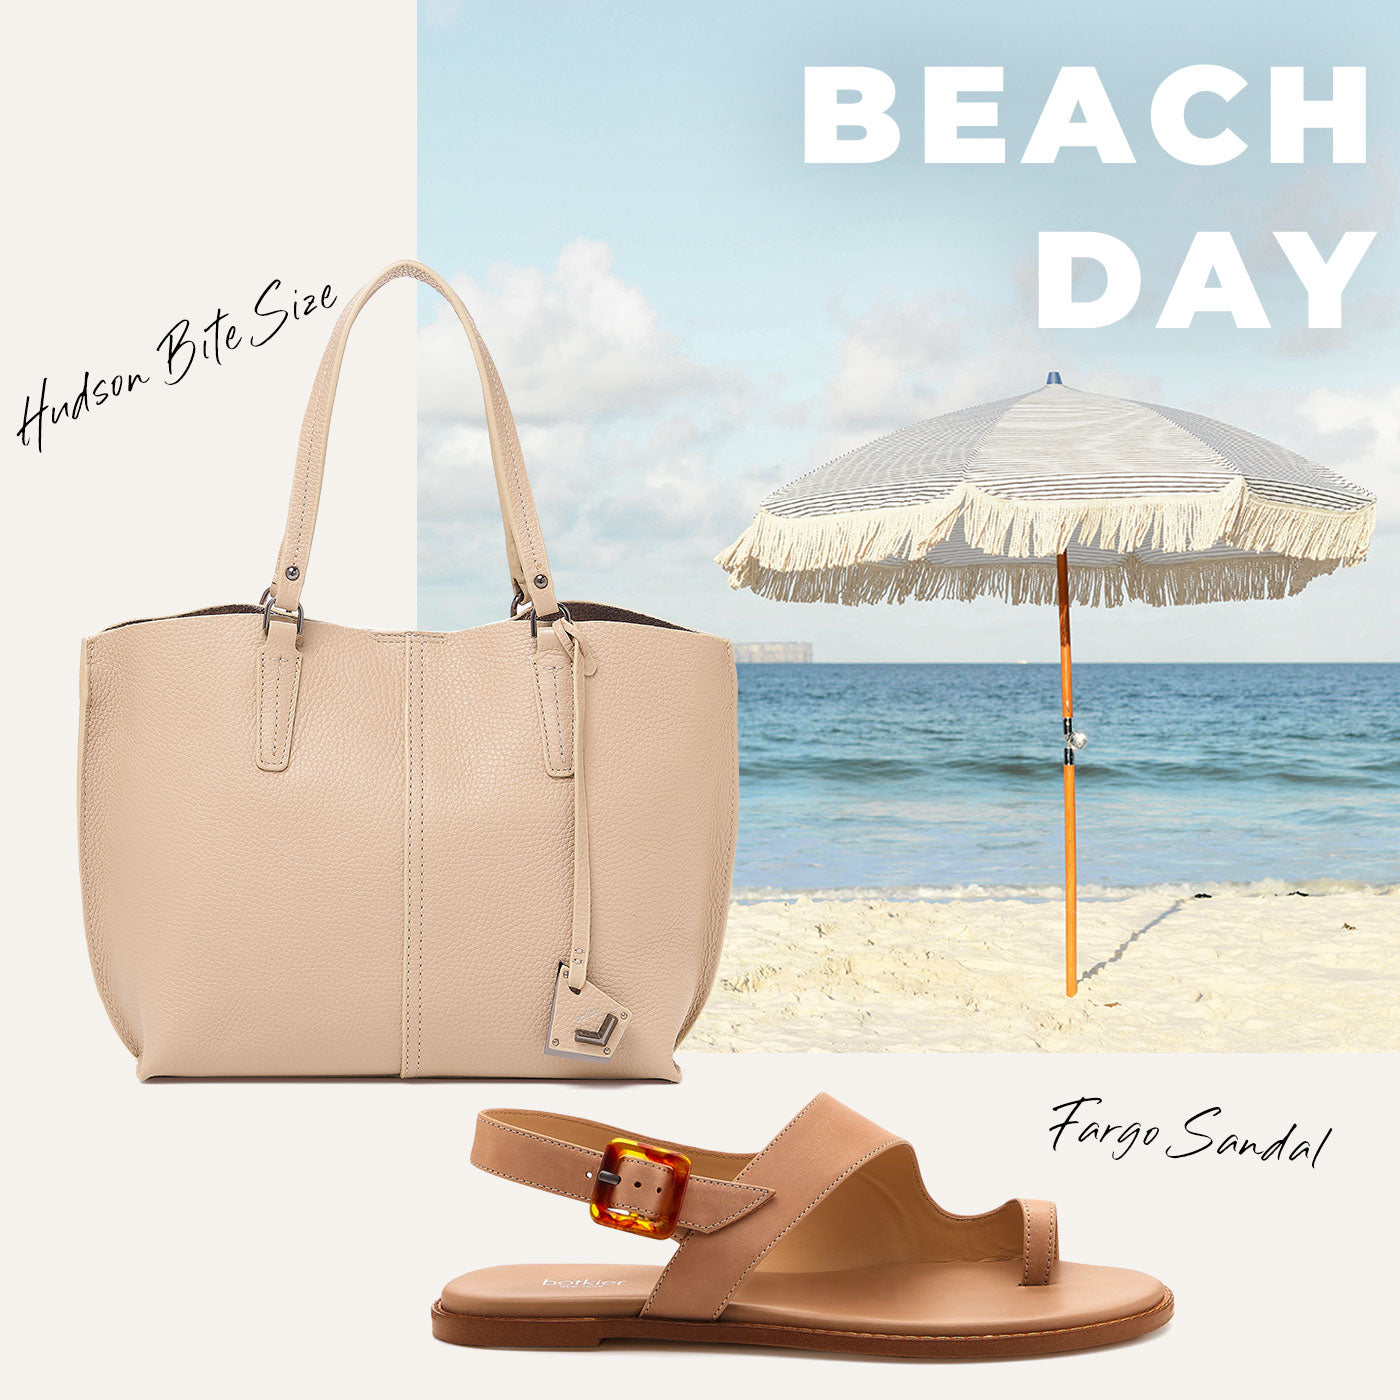 Hudson bite size tote in tan paired with our tan colored Fargo sandals